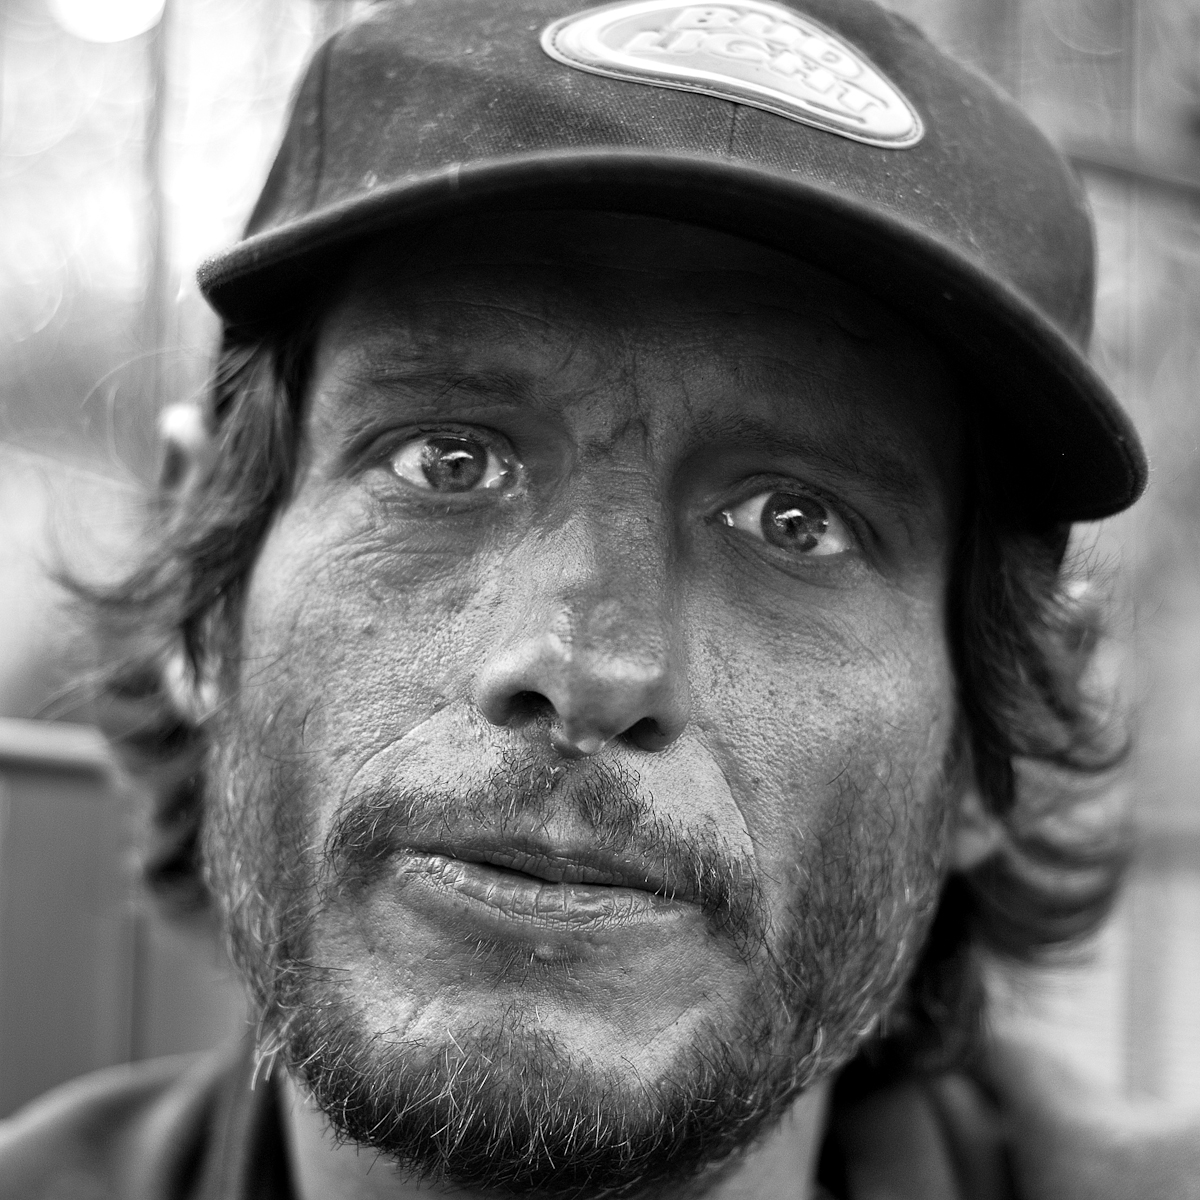 HOMELESS MAN WHOSE LIFE DETOURED WITH A CRASH THAT NEARLY KILLED HIM, SAN FRANCISCO, JUNE 2006homeless john is from the bay area. john studied to be a mechanic of some sort at a trade school in arizona in the 80s. on january 13, 1987 at 8:46pm, he hit a horse in the middle of the road going 55. there were no survivors. but the paramedics brought him back.his fingers and palms are twisted in a manner cruel to someone who sought to earn a living with his hands. his face bones are largely broken. his tear ducts discharge through his right eye what should come out his nose.he got by though and managed to live in a small studio (with city assistance) and do small jobs through st. vincents. on one job, he was seeking to break up a fight when one of the guys pulled a knife and lunged to stab him. he was wearing several coats and suffered only cuts to his clothing. but he was enraged and severely beat the man; sending him to the hospital. st. vincents dropped him.in 2004, a neighbor accused him of trying to stab him. he lost his housing.now he “camps out” and does small jobs after hours for some local nightclubs.(6/19/06)